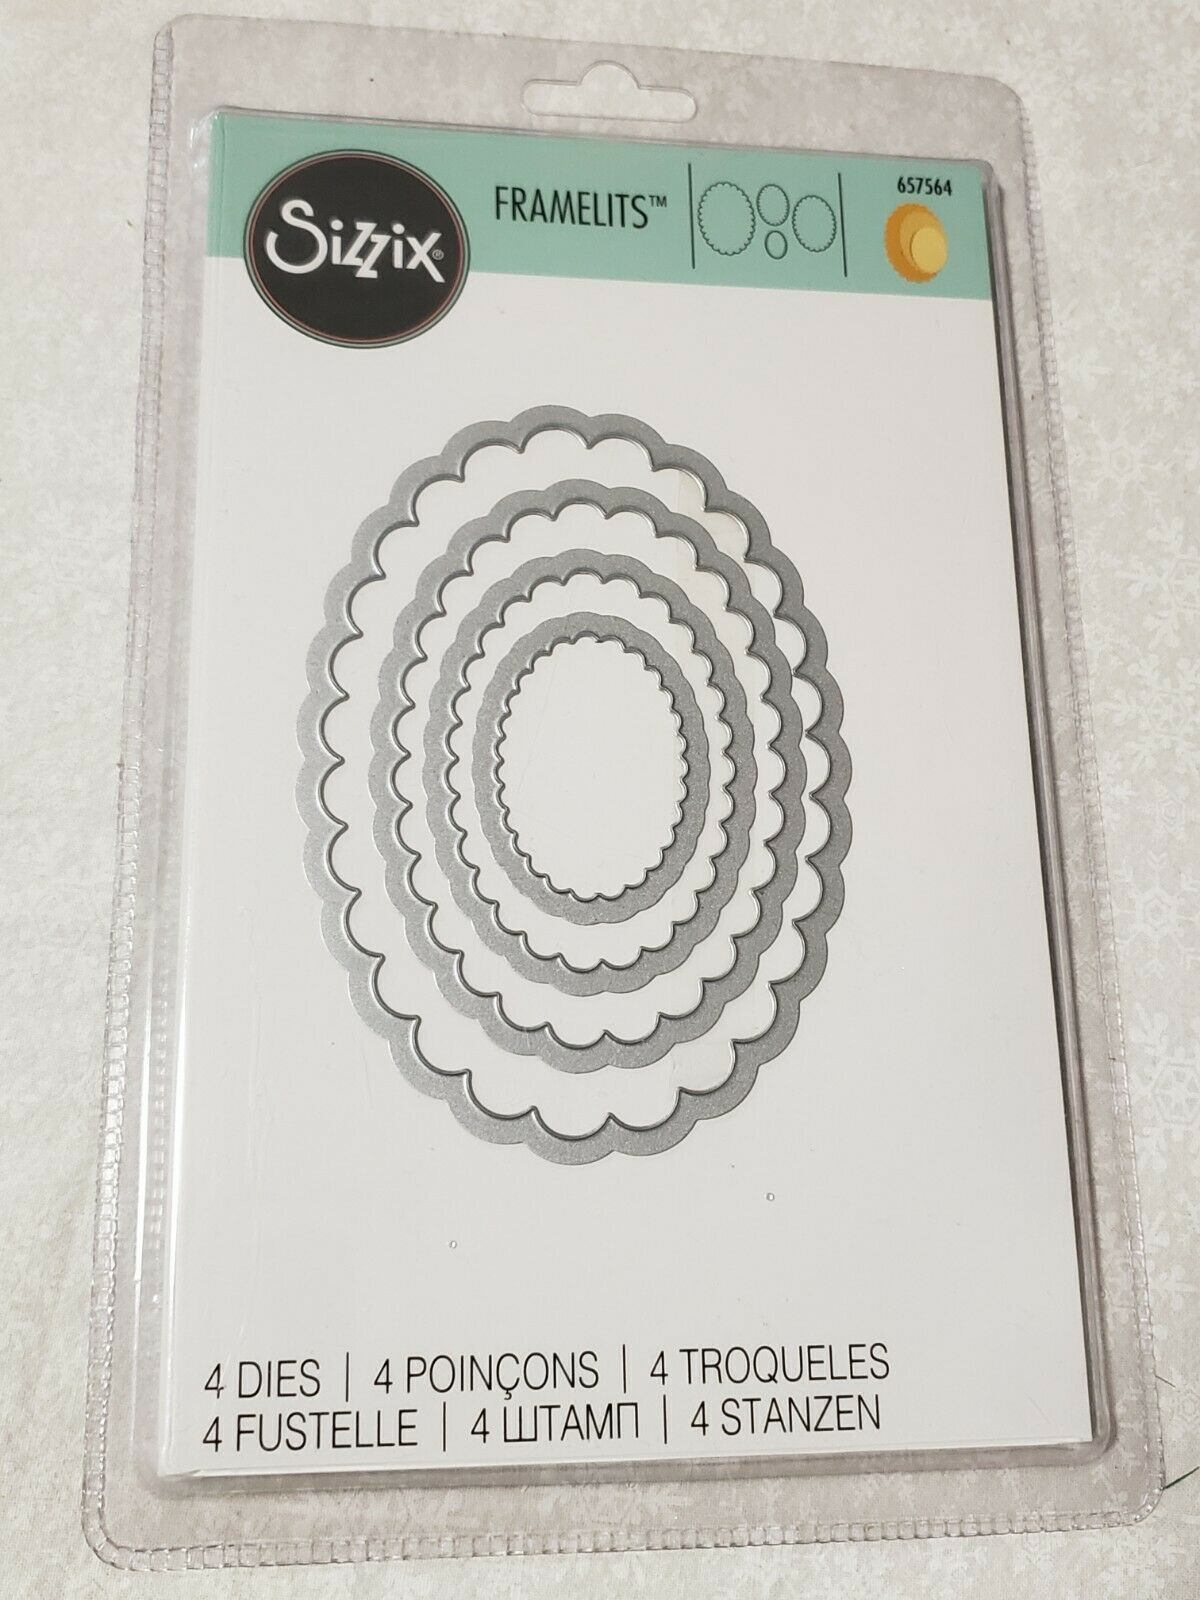 Sizzix Framelits Scalloped Ovals Die Cuts Cardmaking Scrapbooking Shapes New